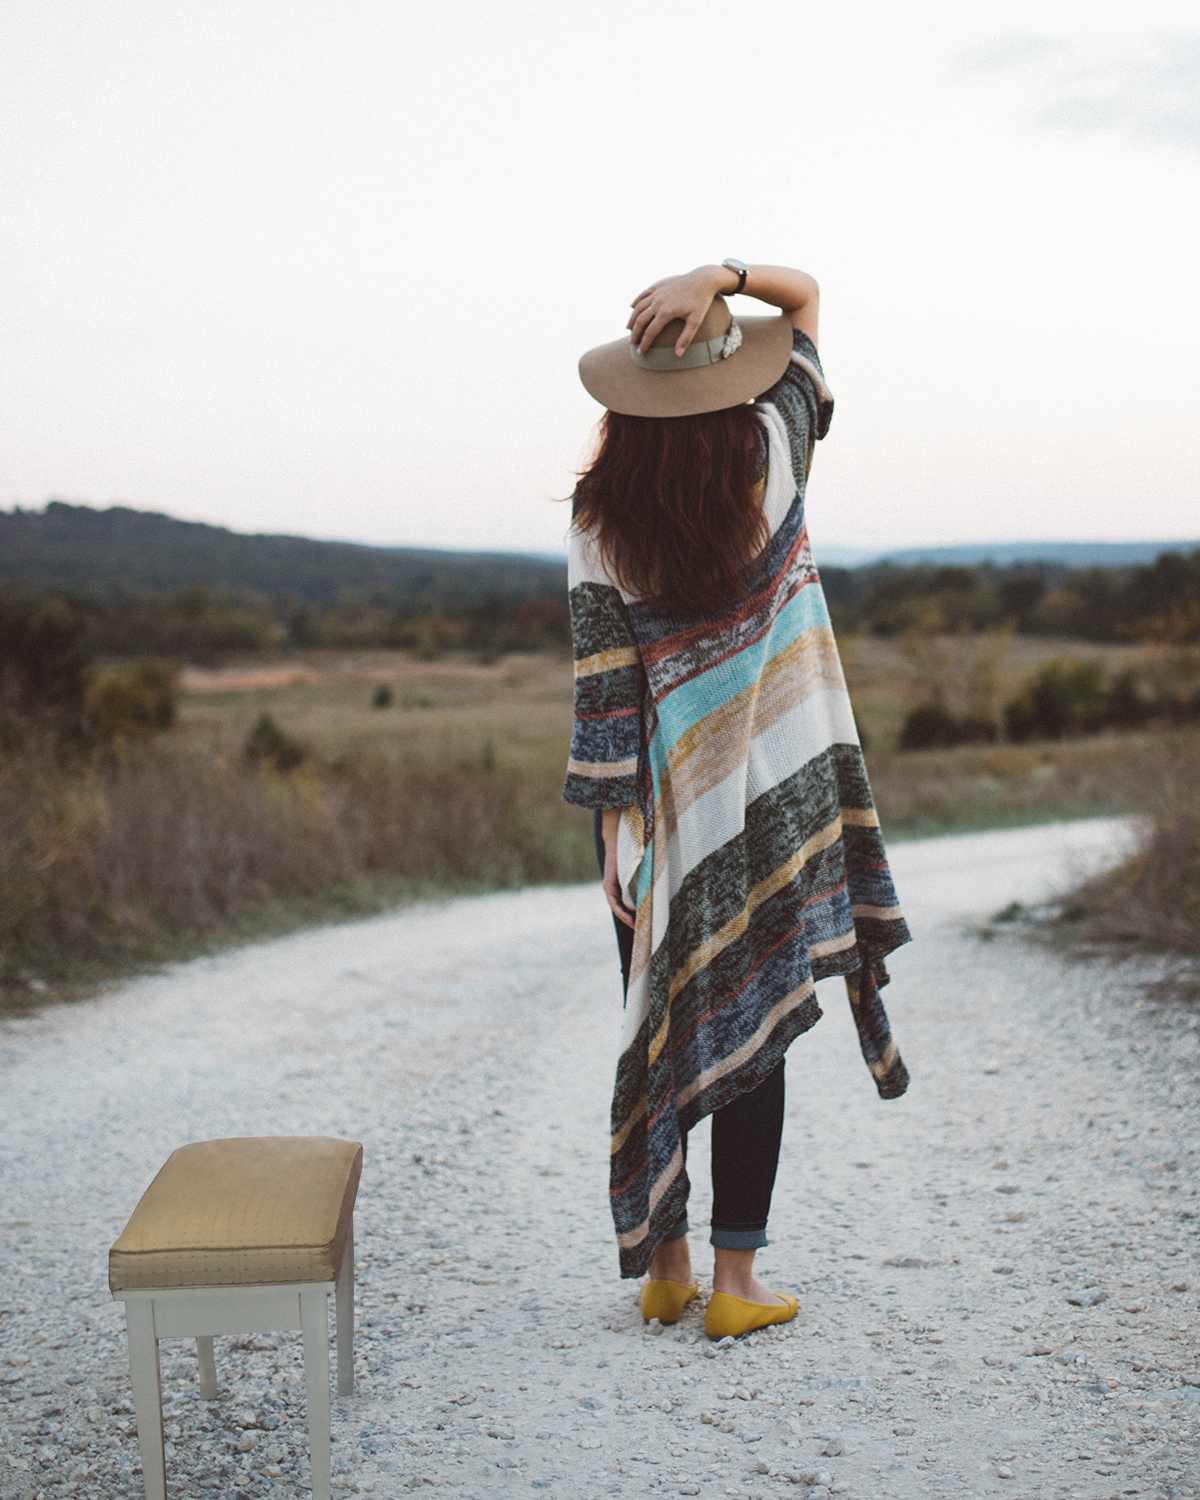 A person with long hair holds a hat on their head as they stand next to a piano bench staring down a gravel road